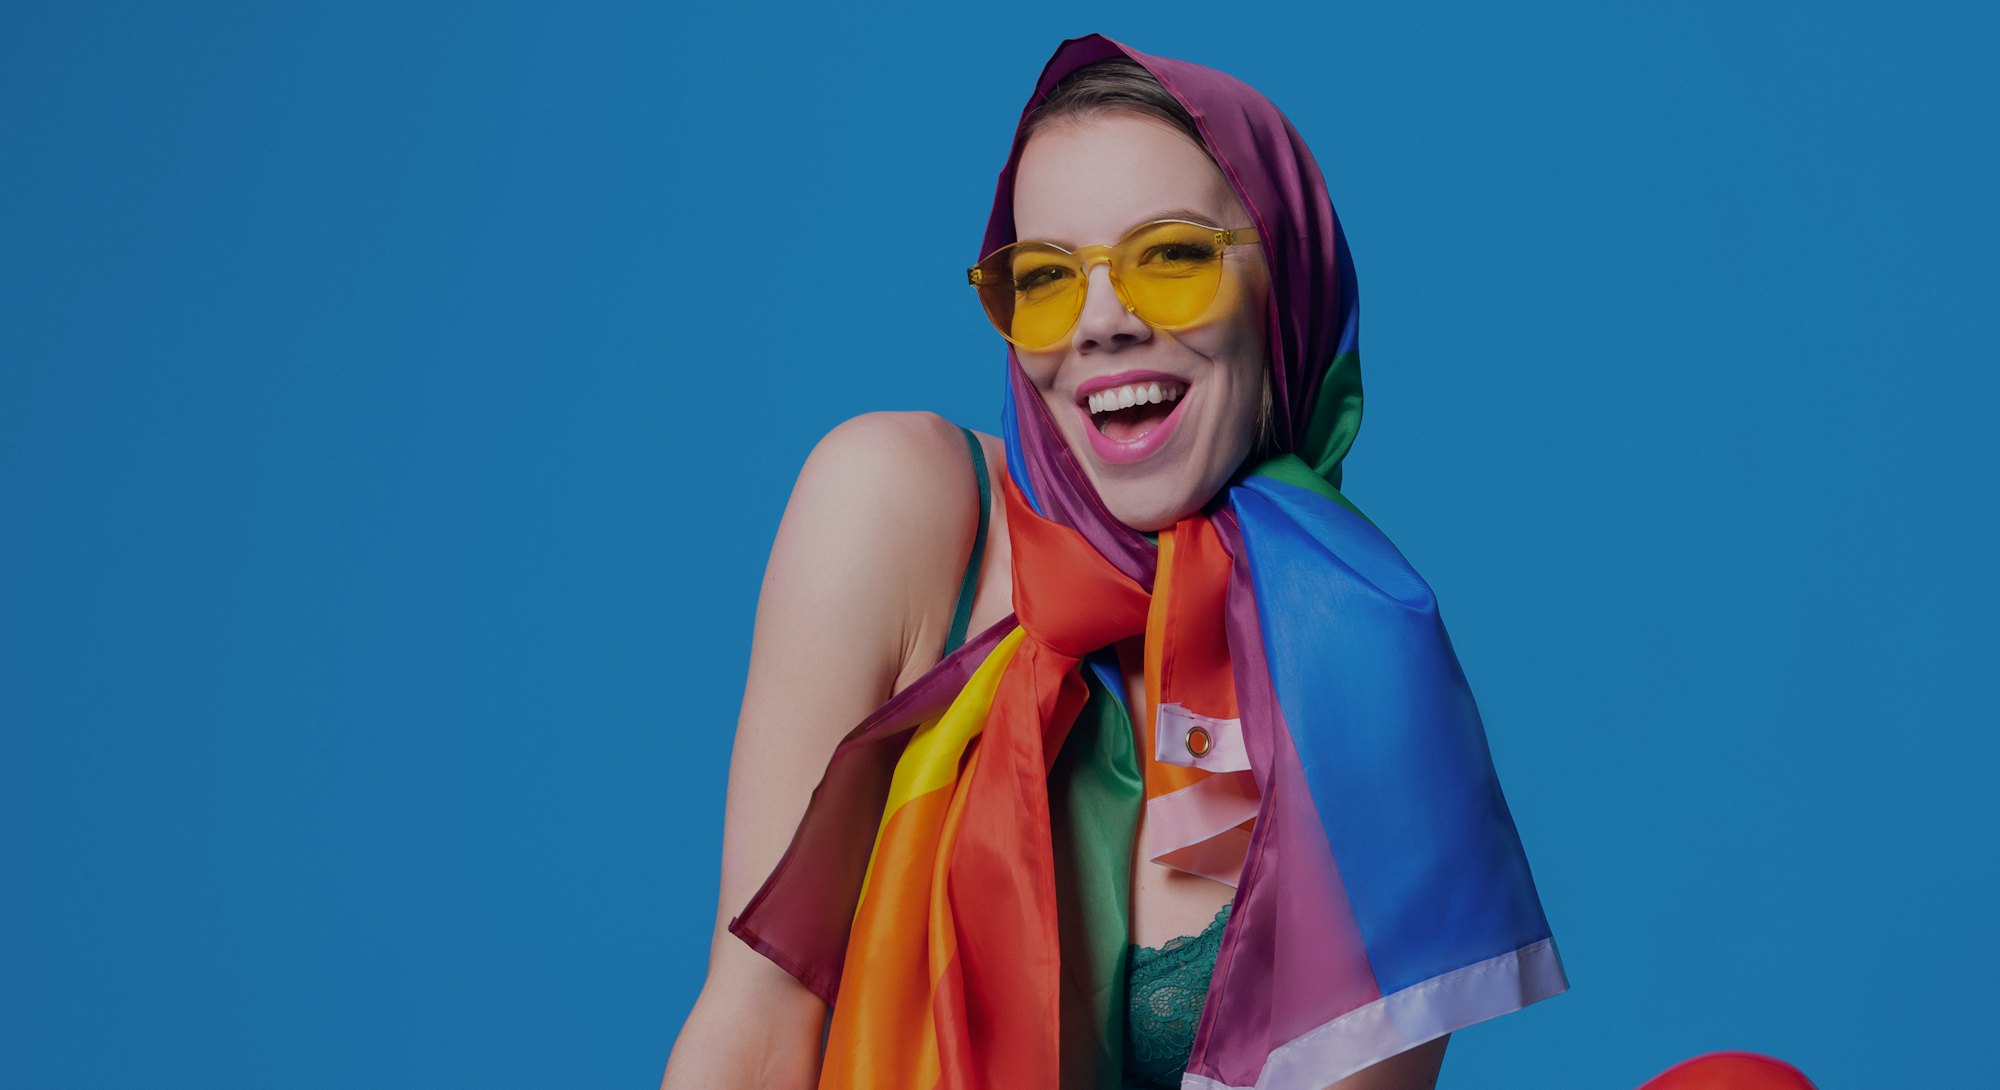 Cheerful fit homosexual woman in bra holding colorful rainbow LGBT flag against blue background in l...